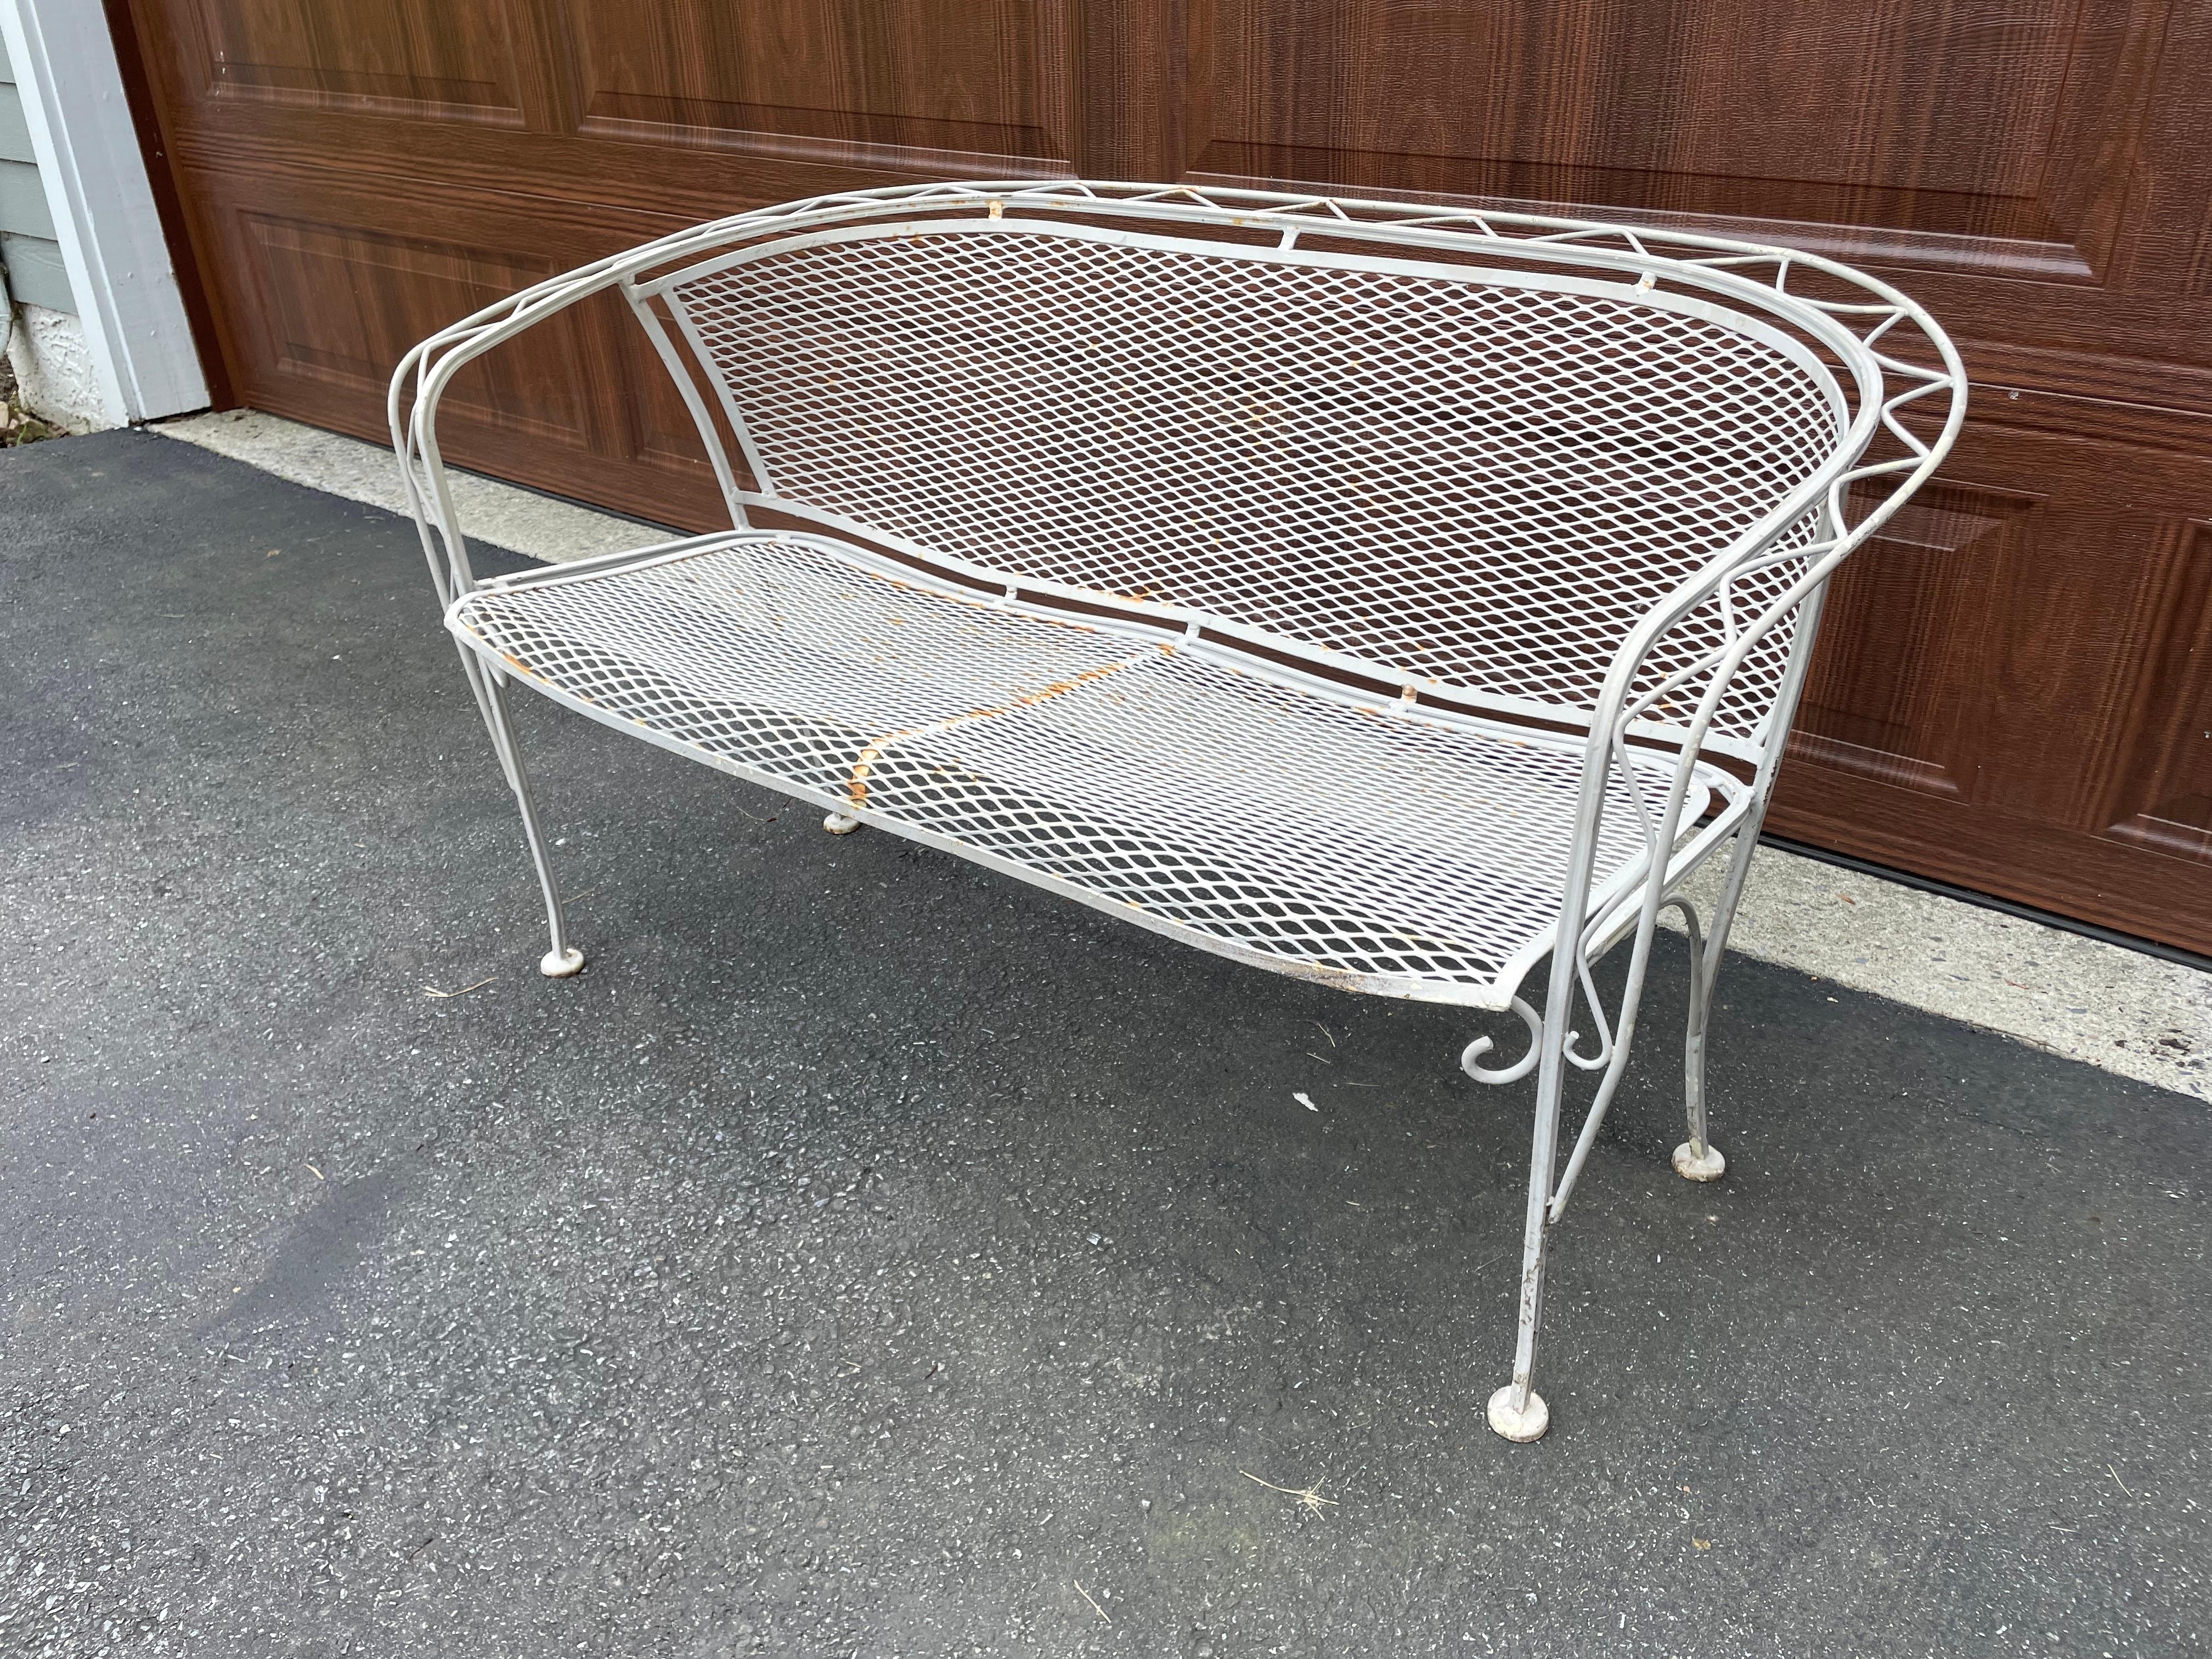 Salterini zig zag painted settee. Great lines, solid piece. Age appropriate surface wear including chipped paint and rust but not affecting use or structural soundness. Great scale for a city terrace!